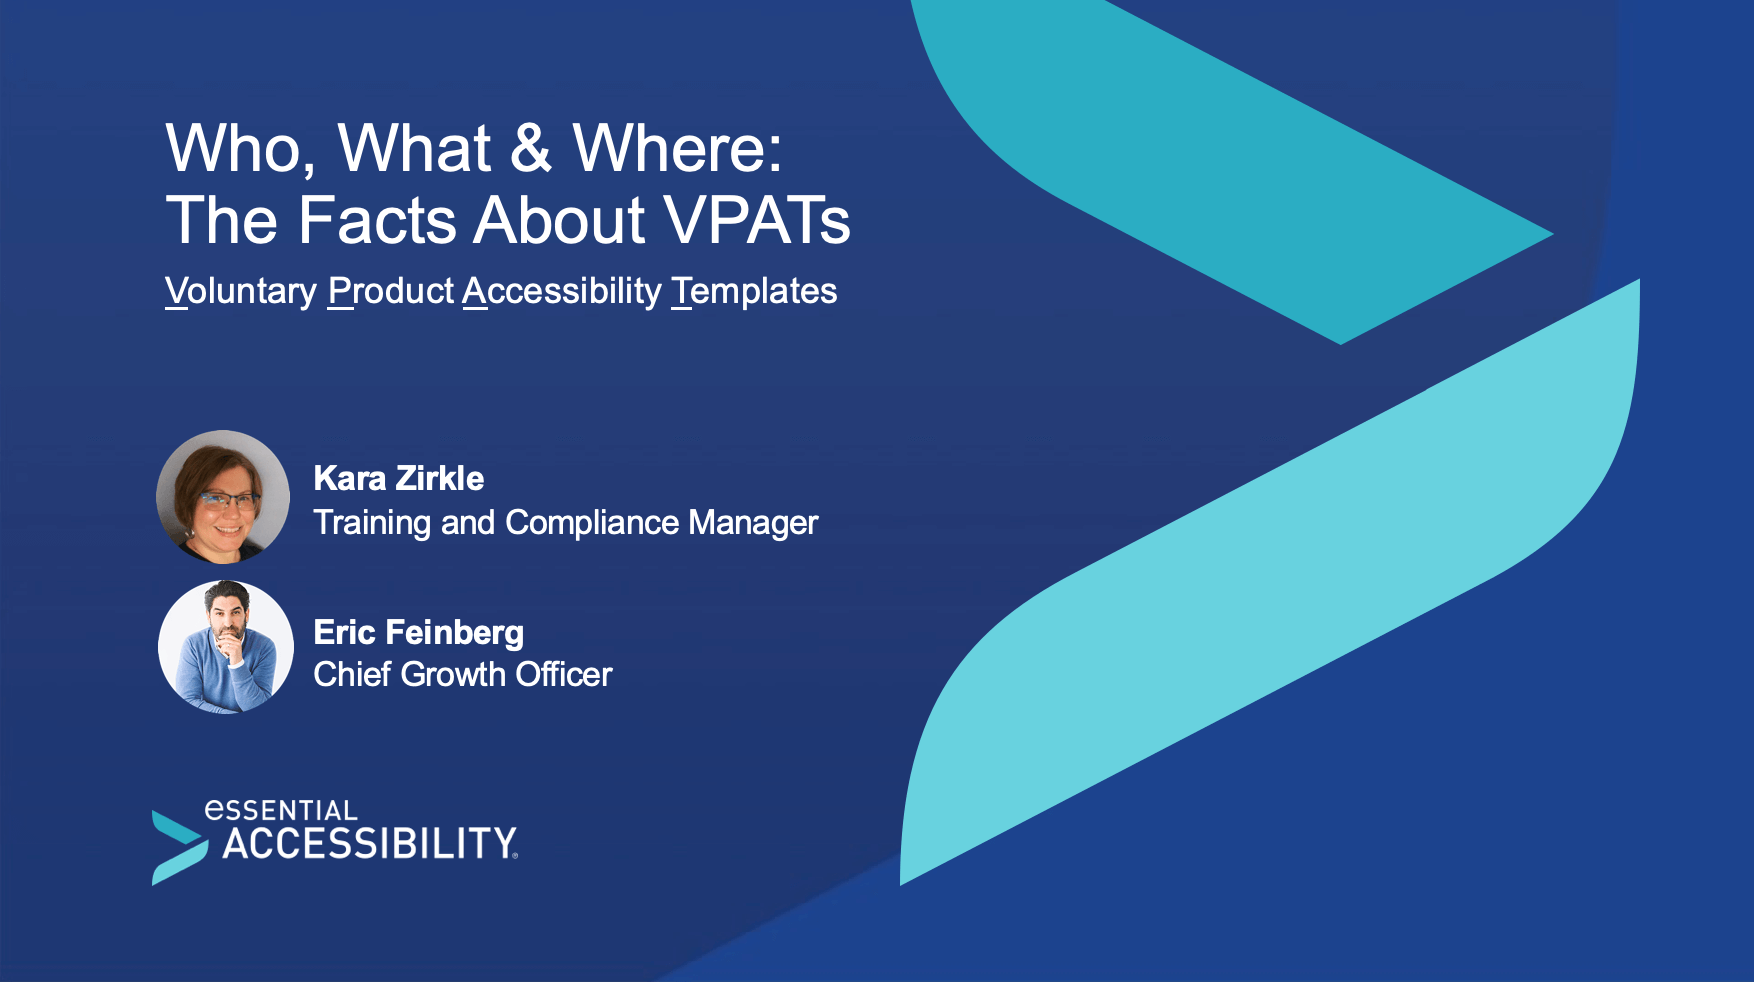 VPAT webinar poster: Who, What & Where: The Facts About VPATs with Kara Zirkle (Training and Compliance Manager) and Eric Feinberg (Chief Growth Officer)